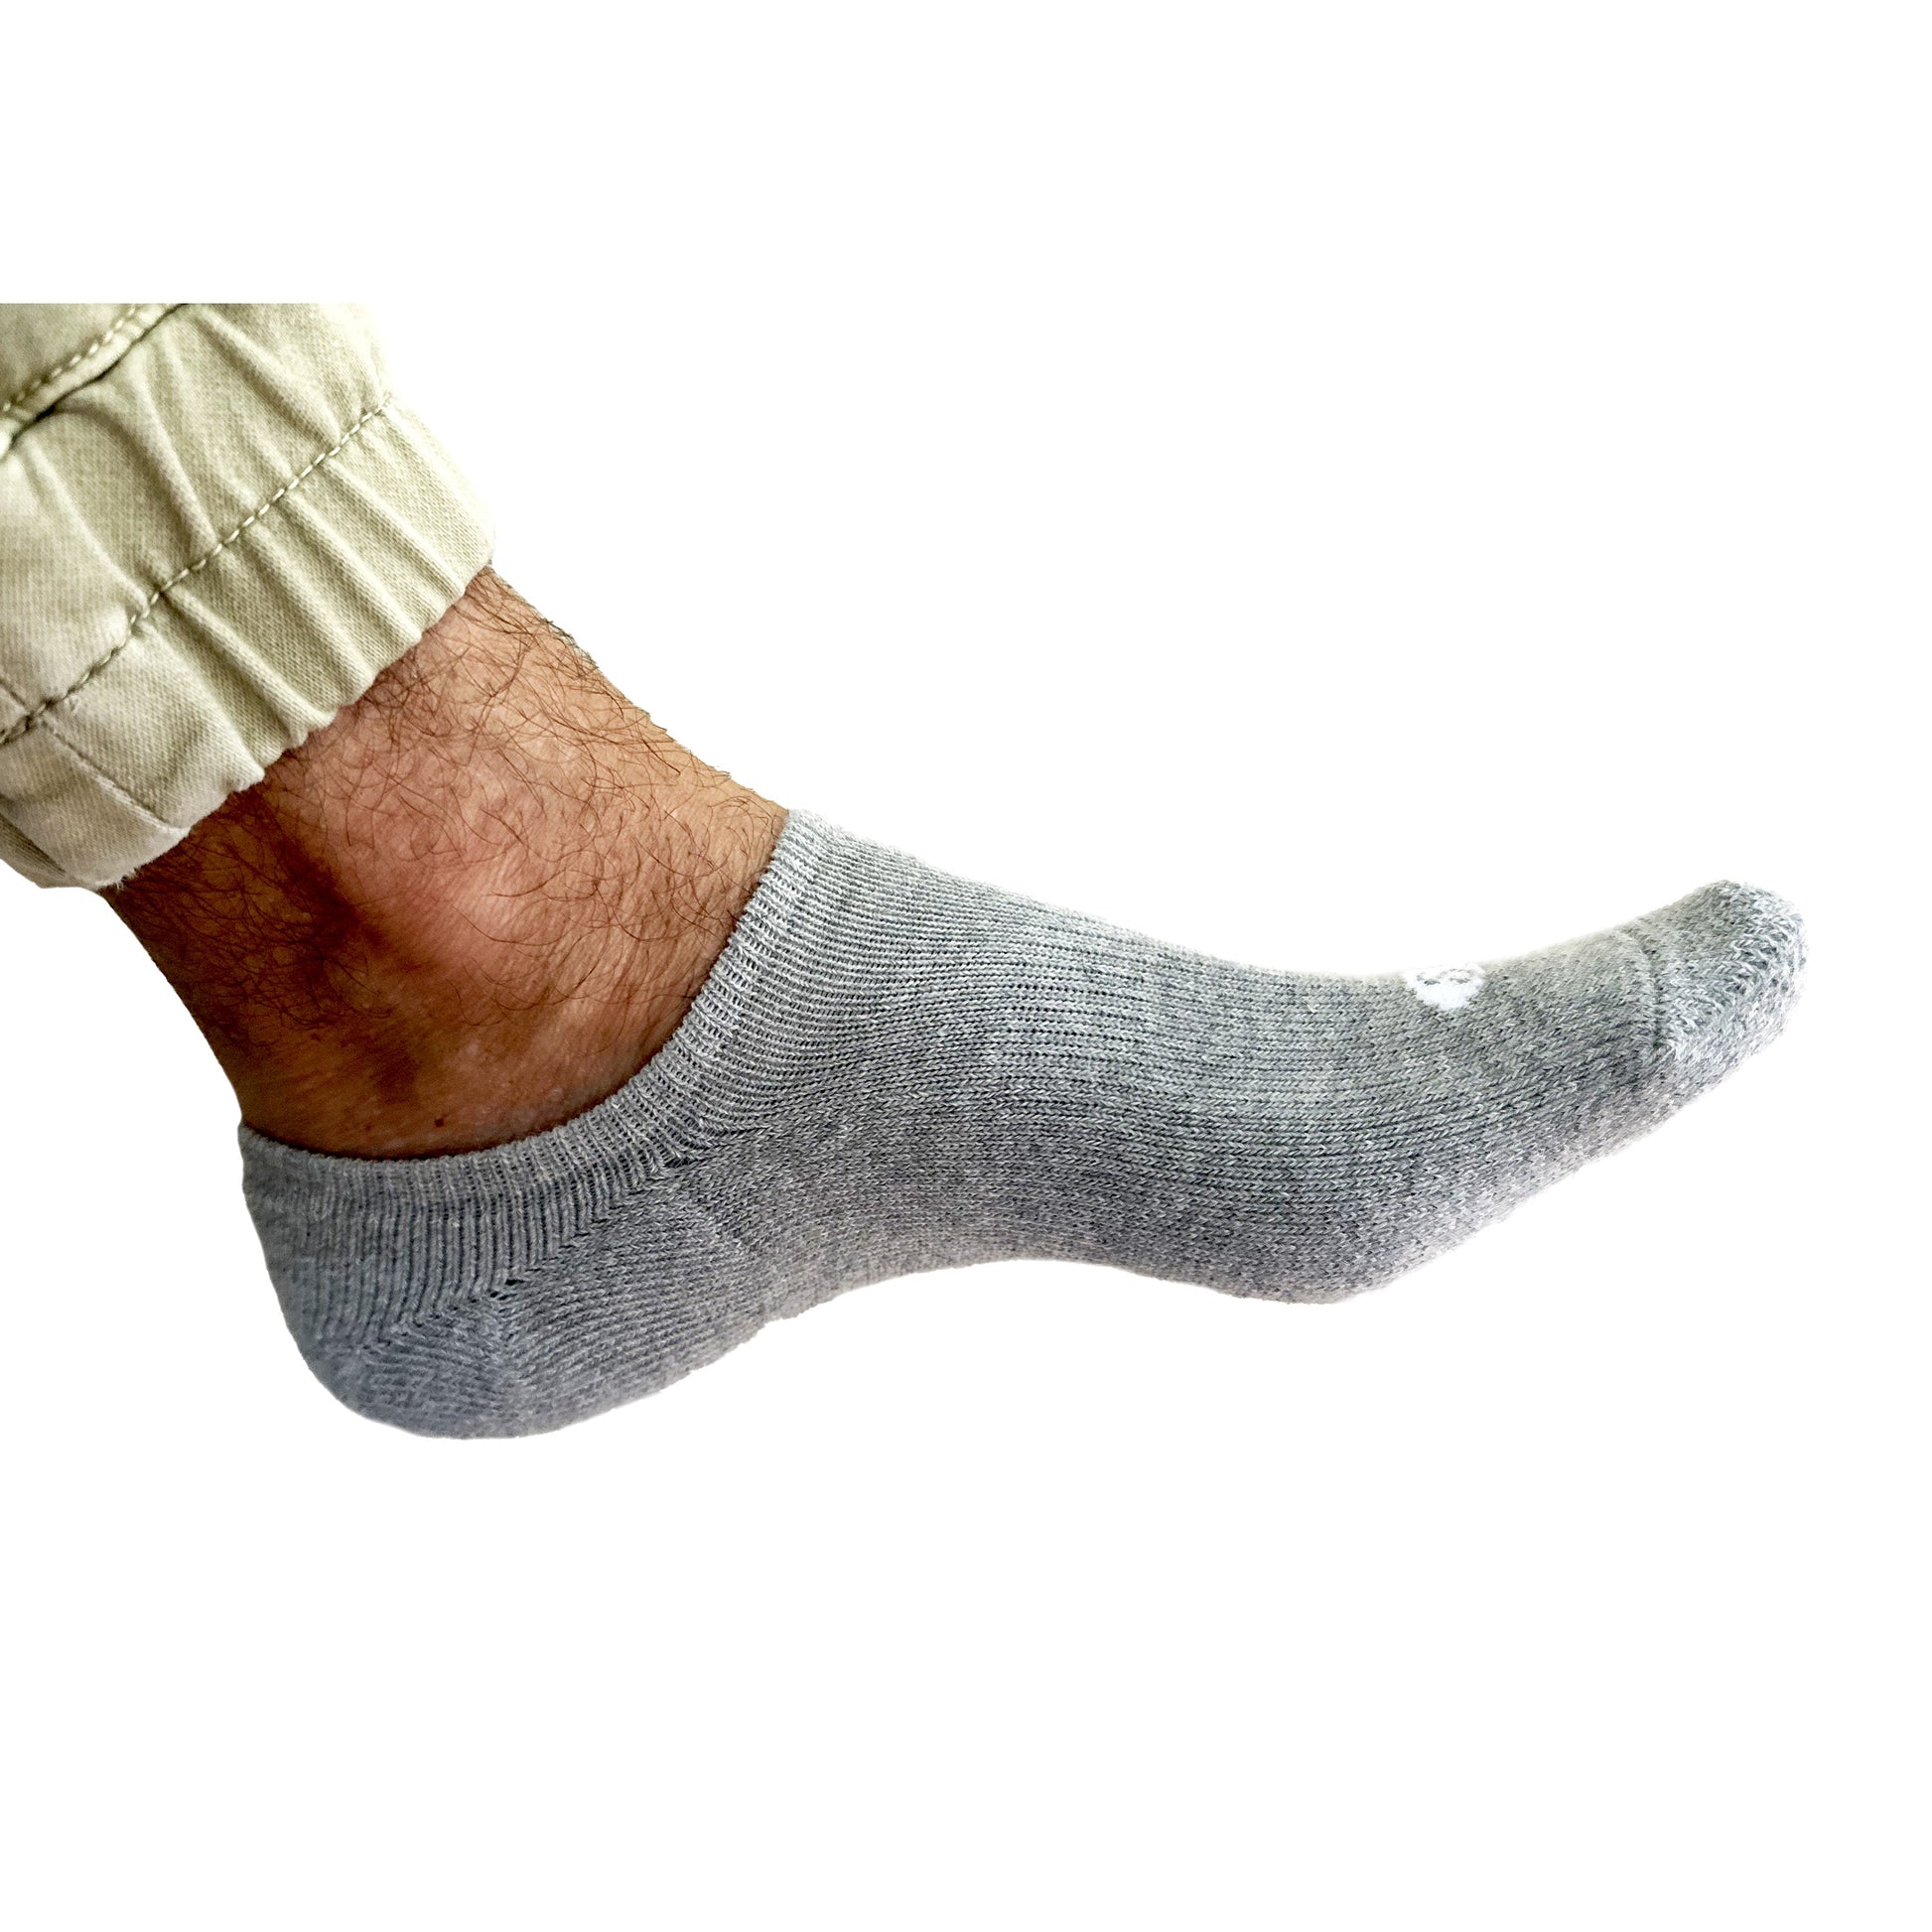 Photograph of a Skinnys Performance padded-heel sock on a man's foot from the side, on a white studio background, revealing low-cut nature of sock